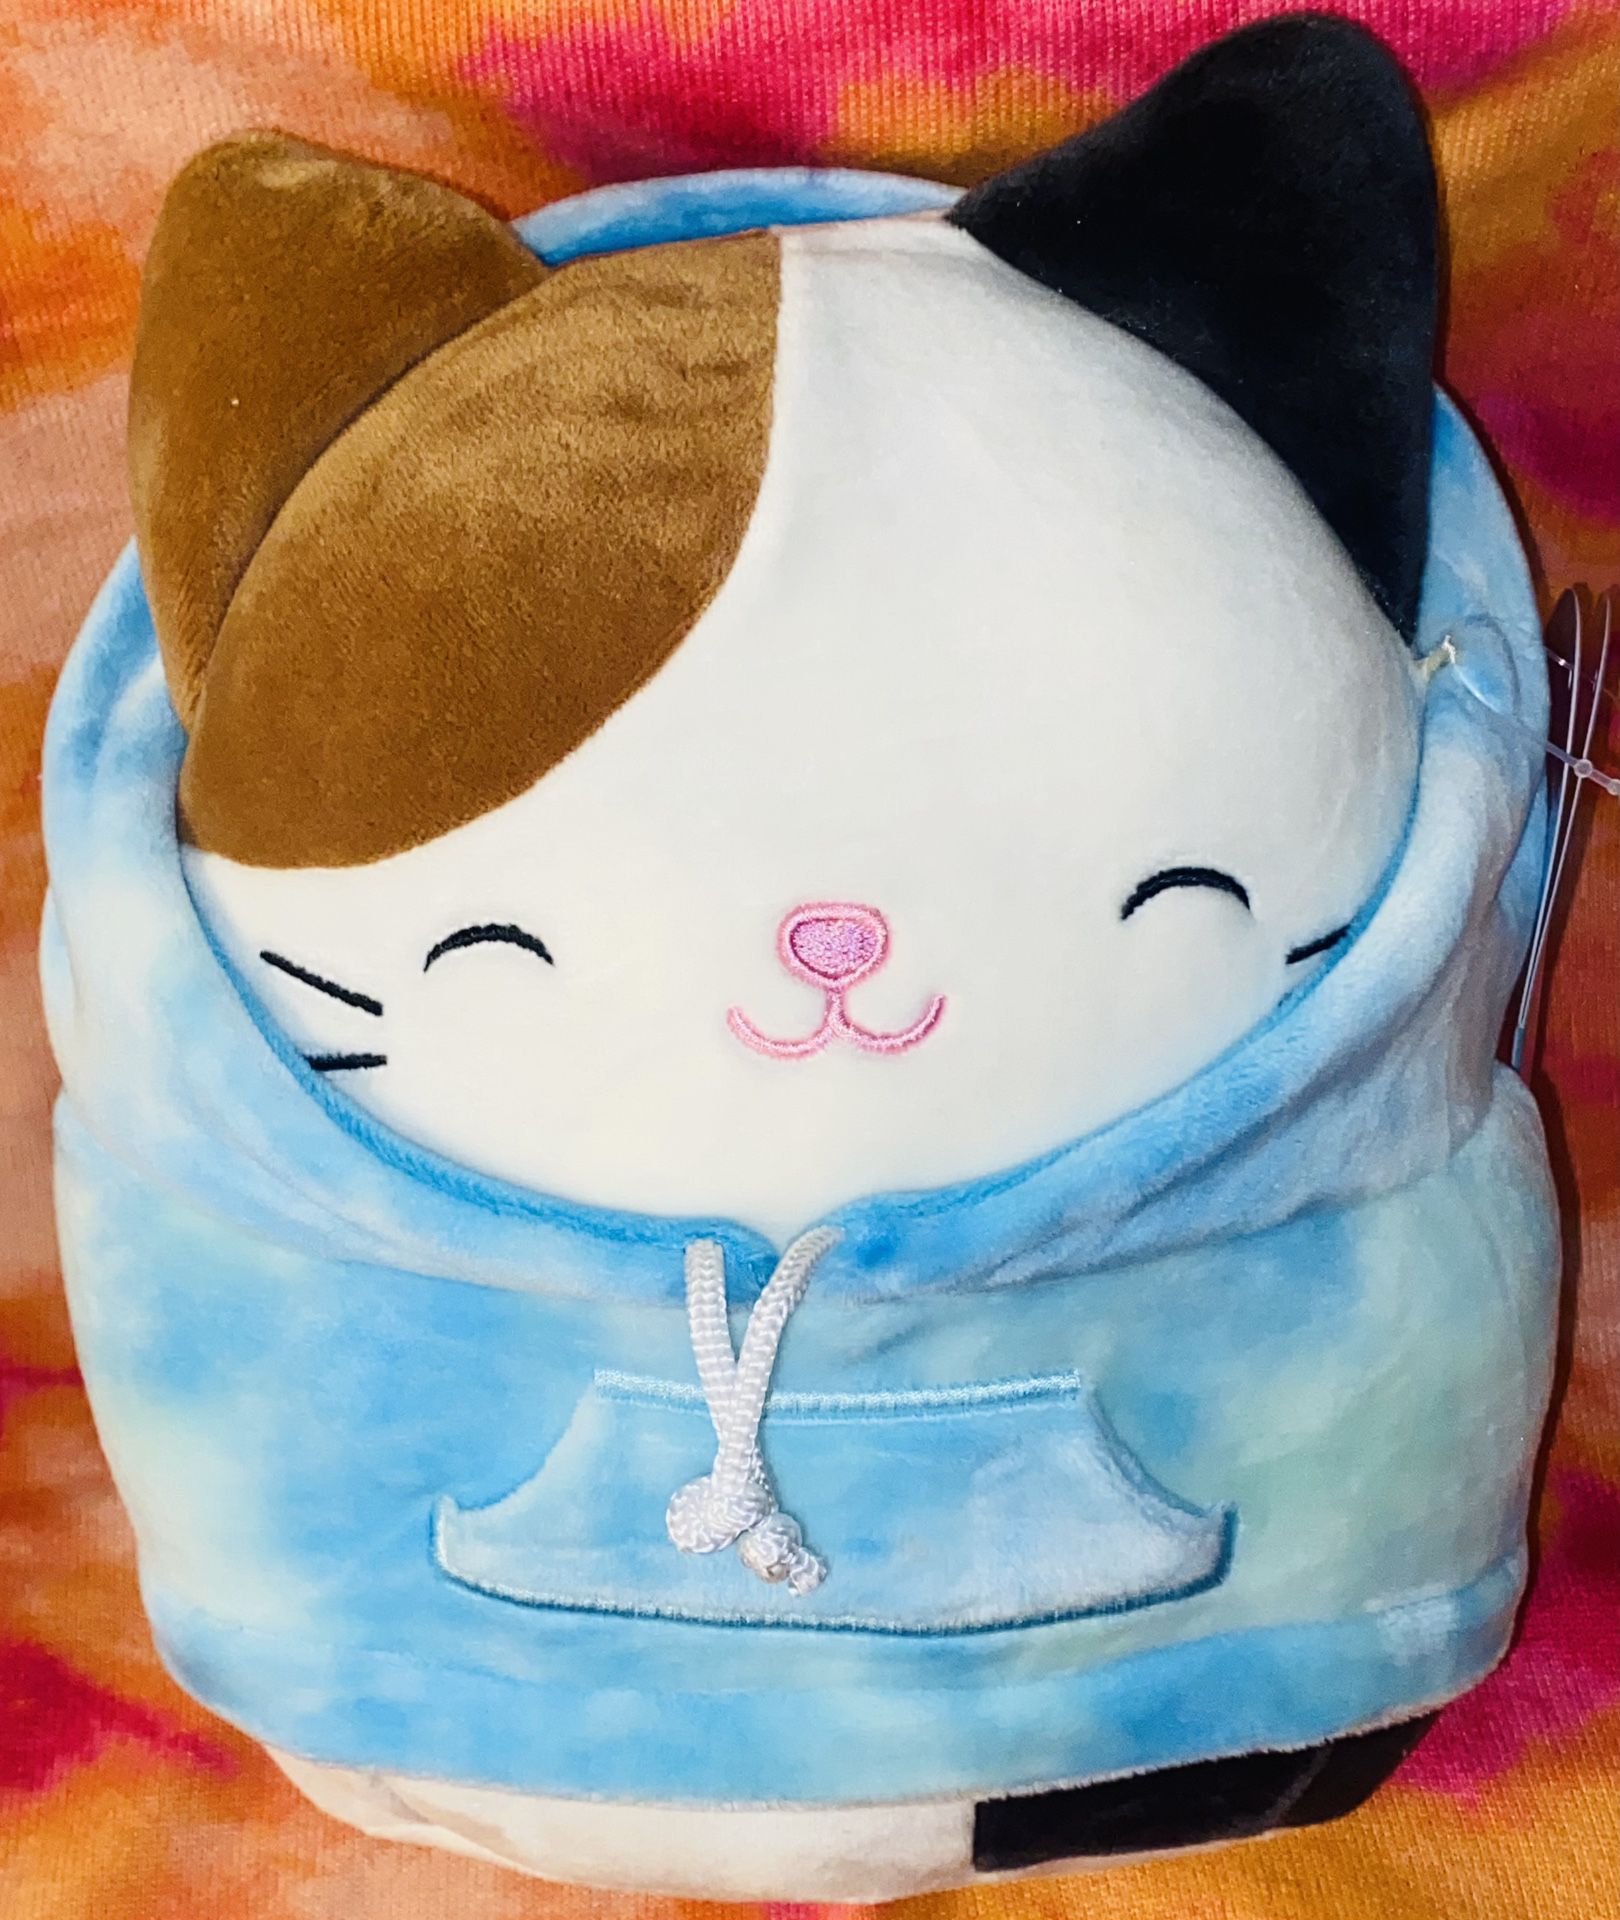 🟤🐱🔷🐈⚫️🎀✨SQUISHMALLOWS 12” (CAM)THE CAT🐈HOODIE SQUAD PLUSH STUFFED TOY💕🦋🟤🐱🤍🐈✨